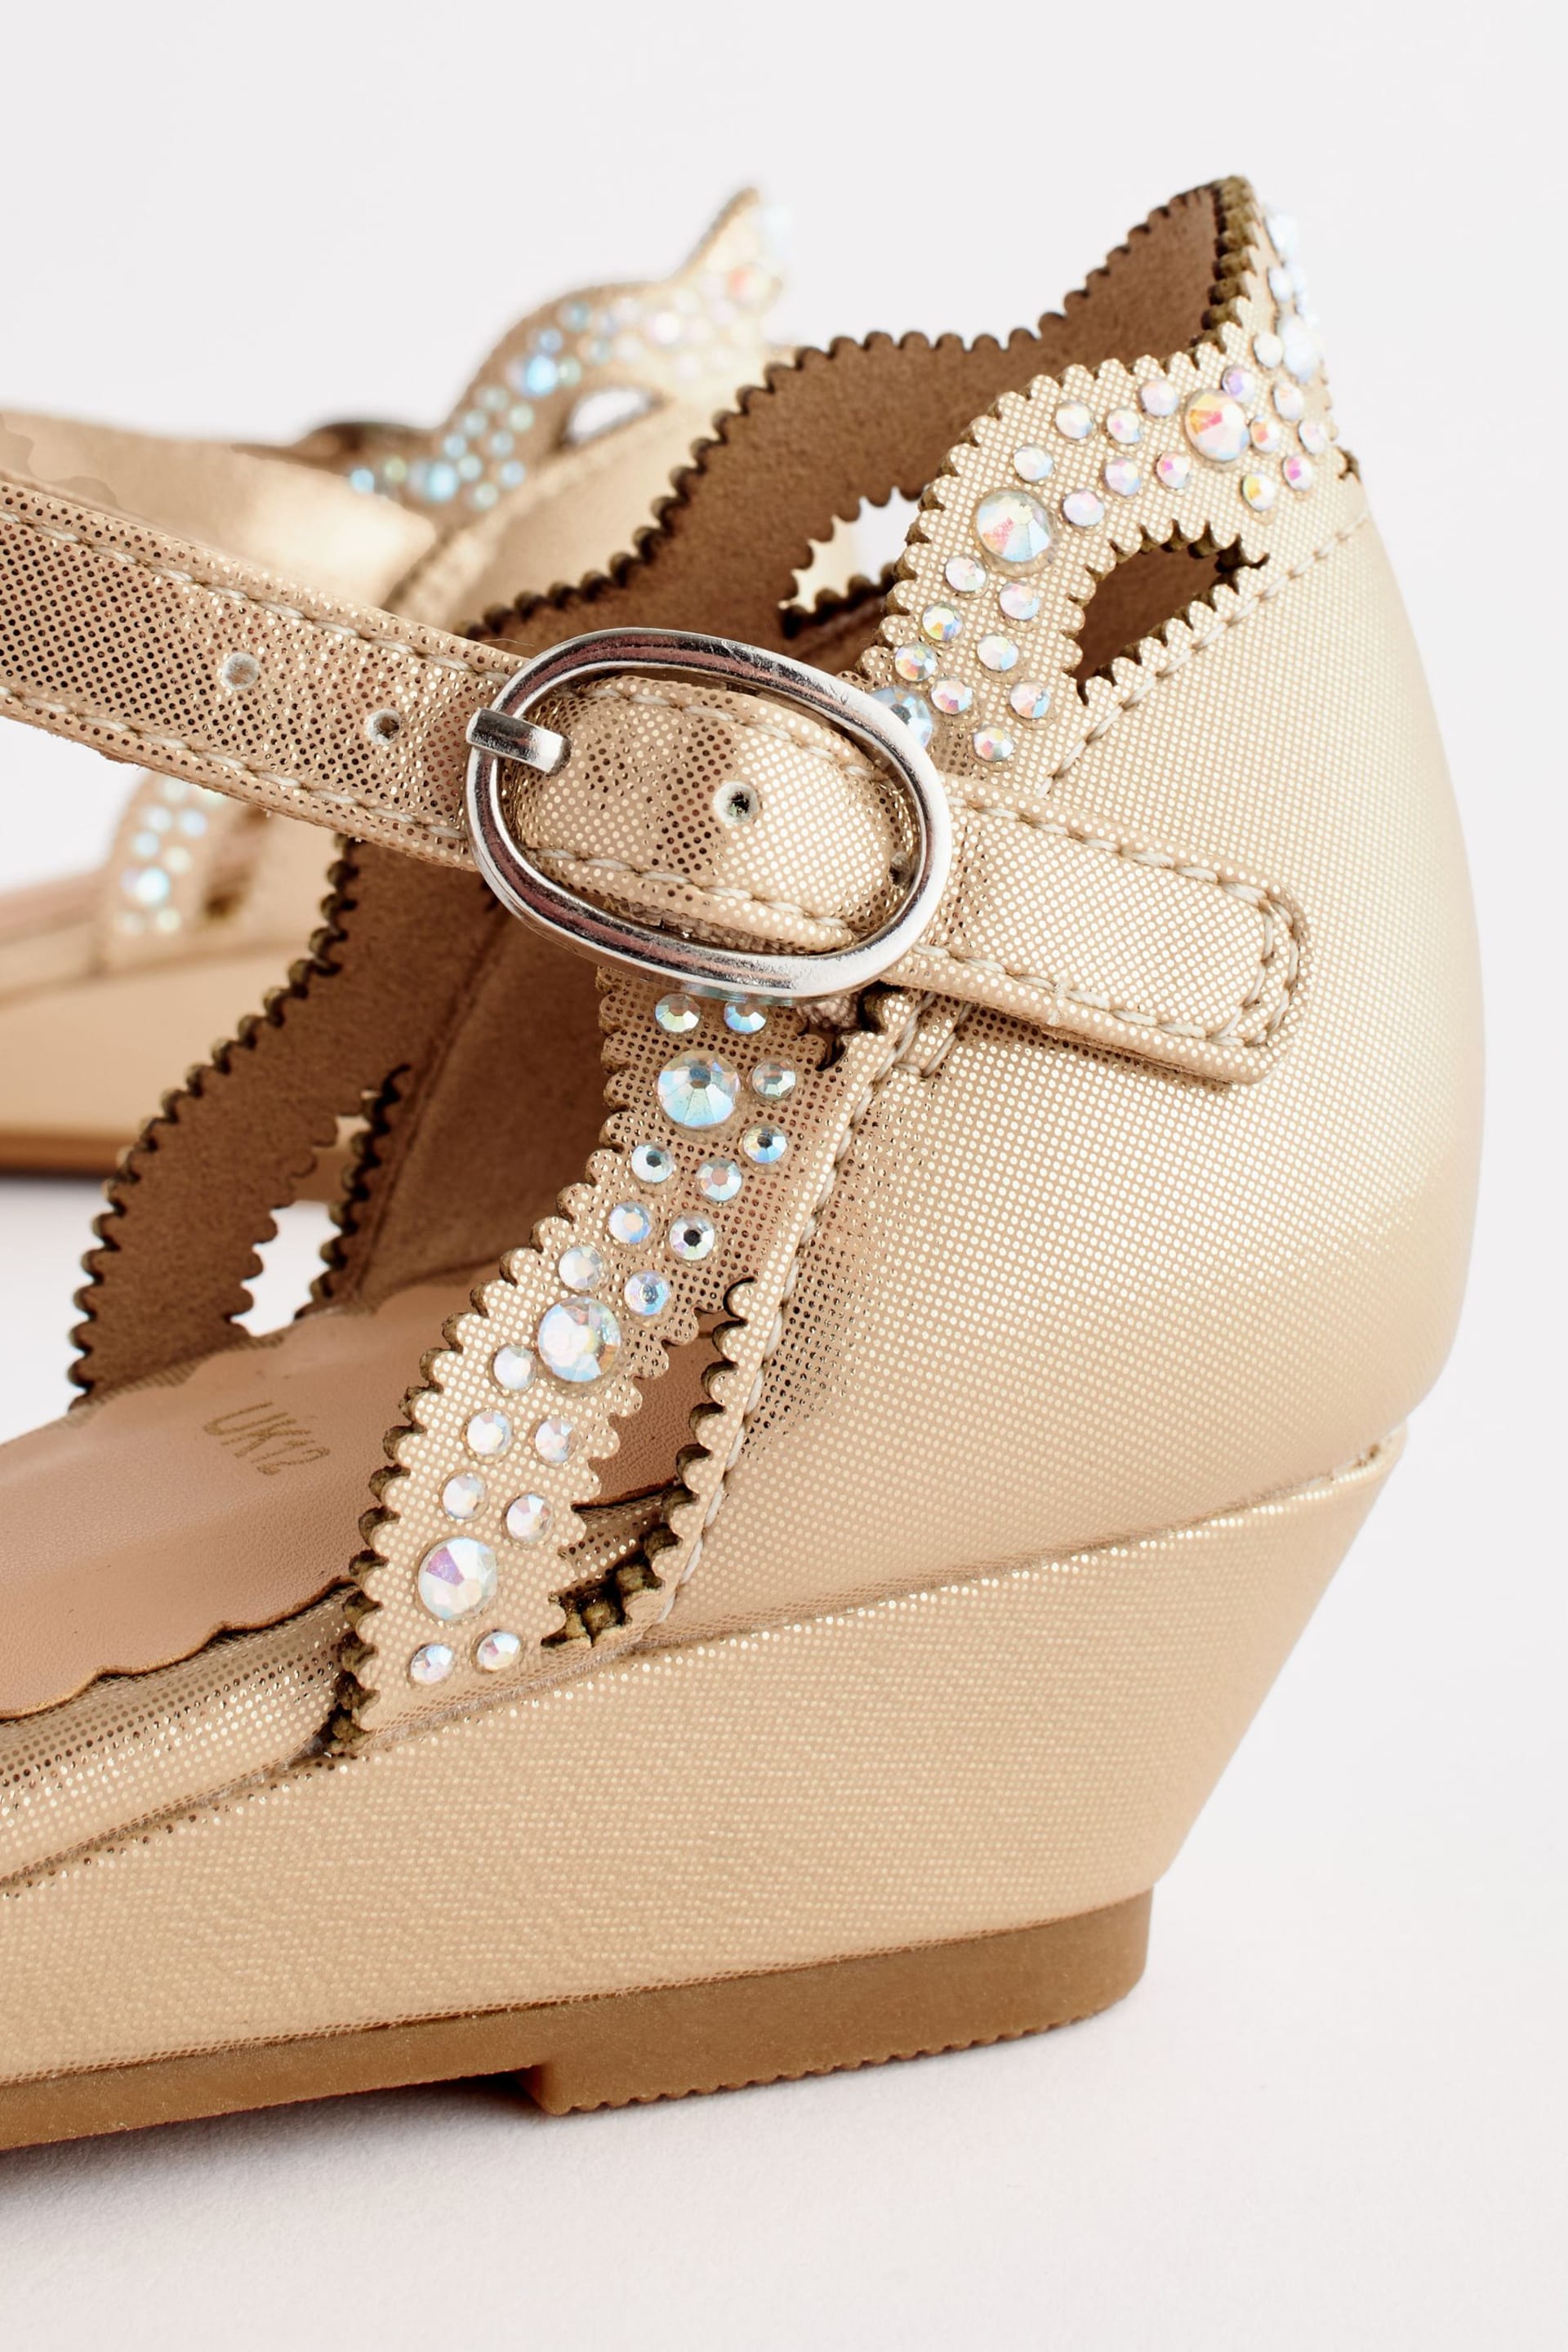 Gold Glitter Wedges - Image 7 of 7